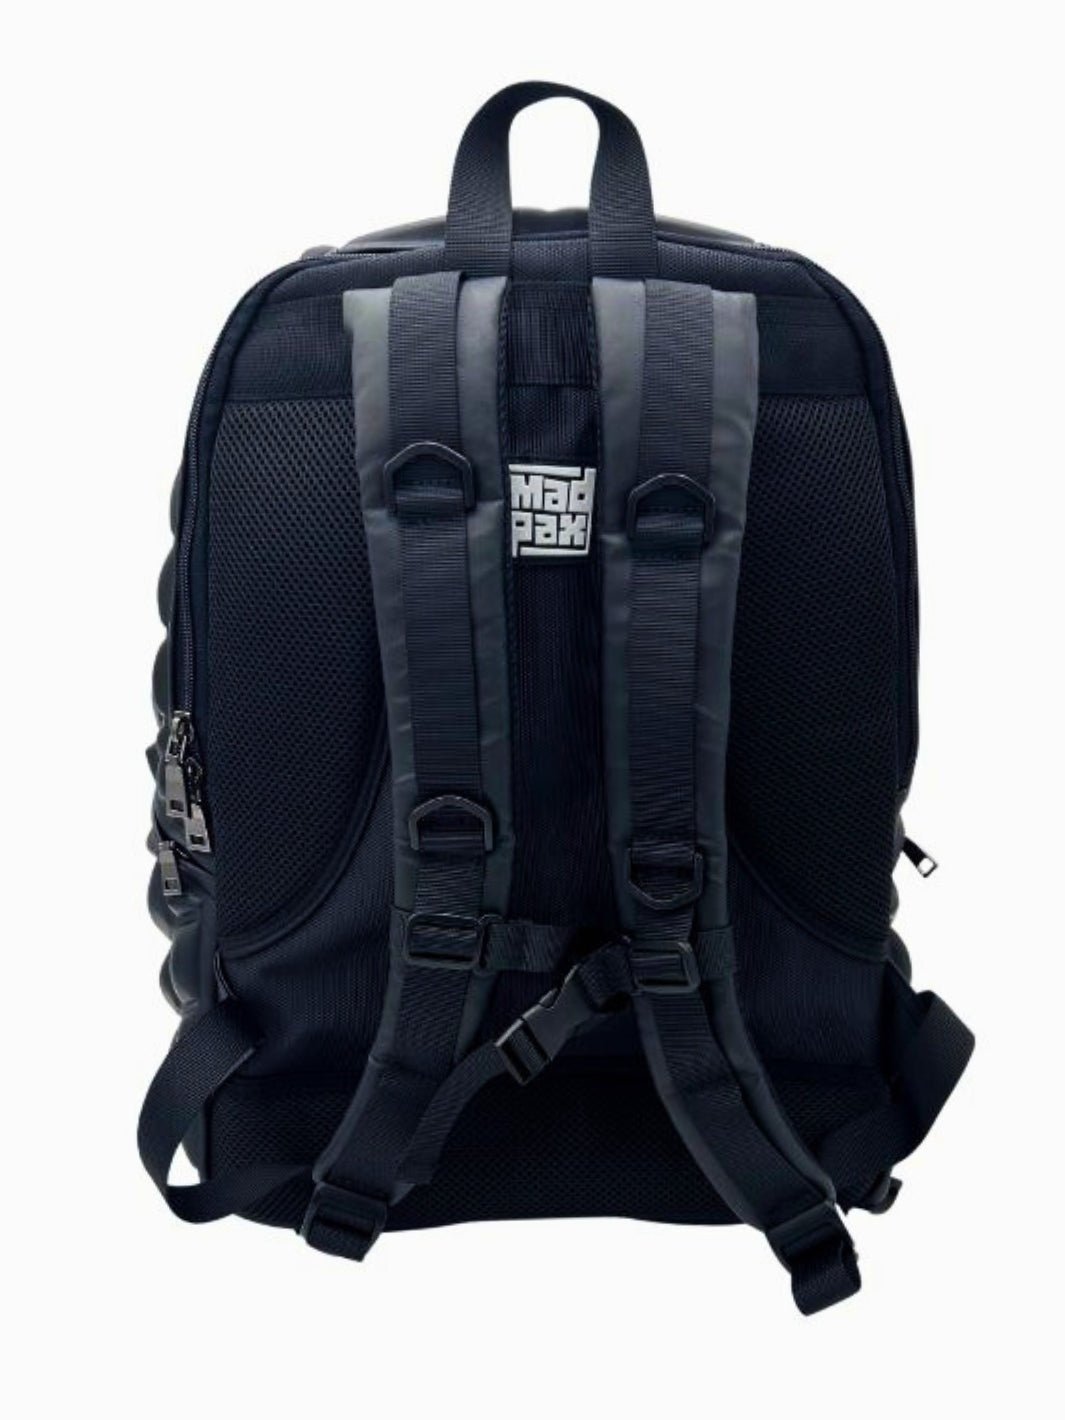 Back View of Got Your Black - Black Backpack | Madpax